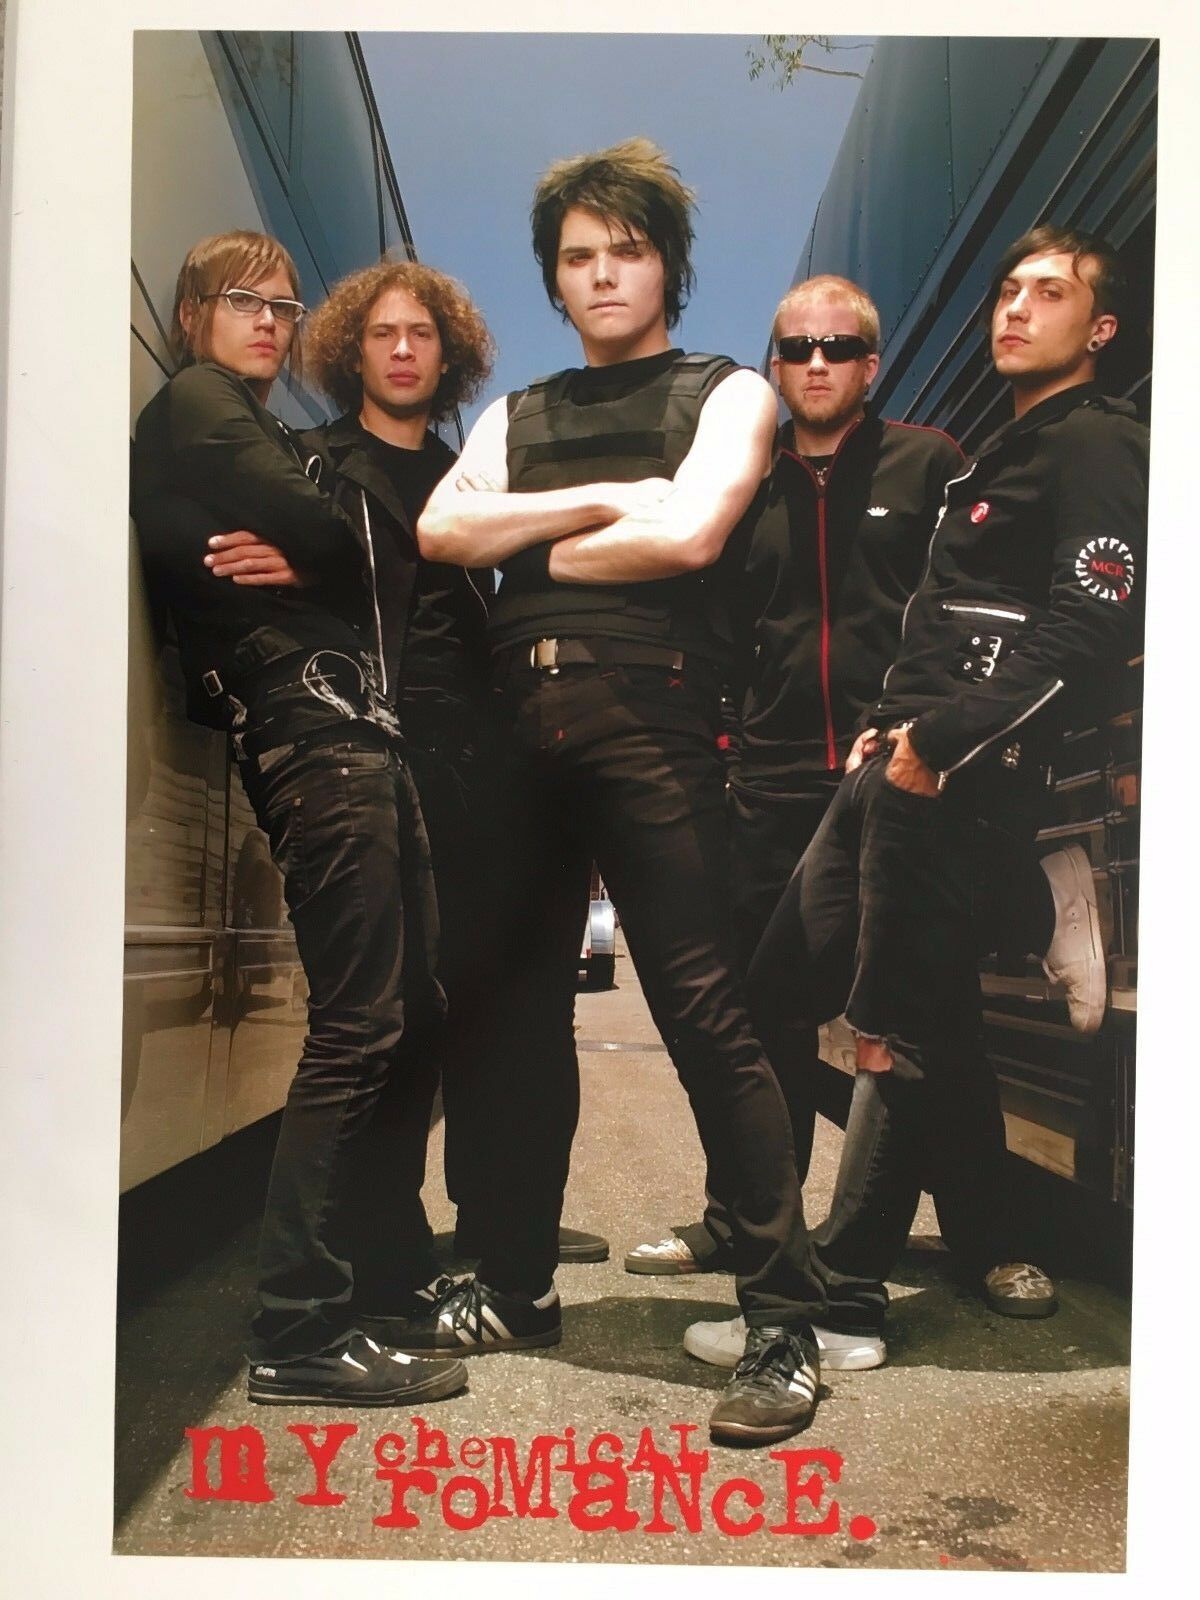 My Chemical Romance,music Band,photo By Kevin Estrada, Licensed 2006 Poster